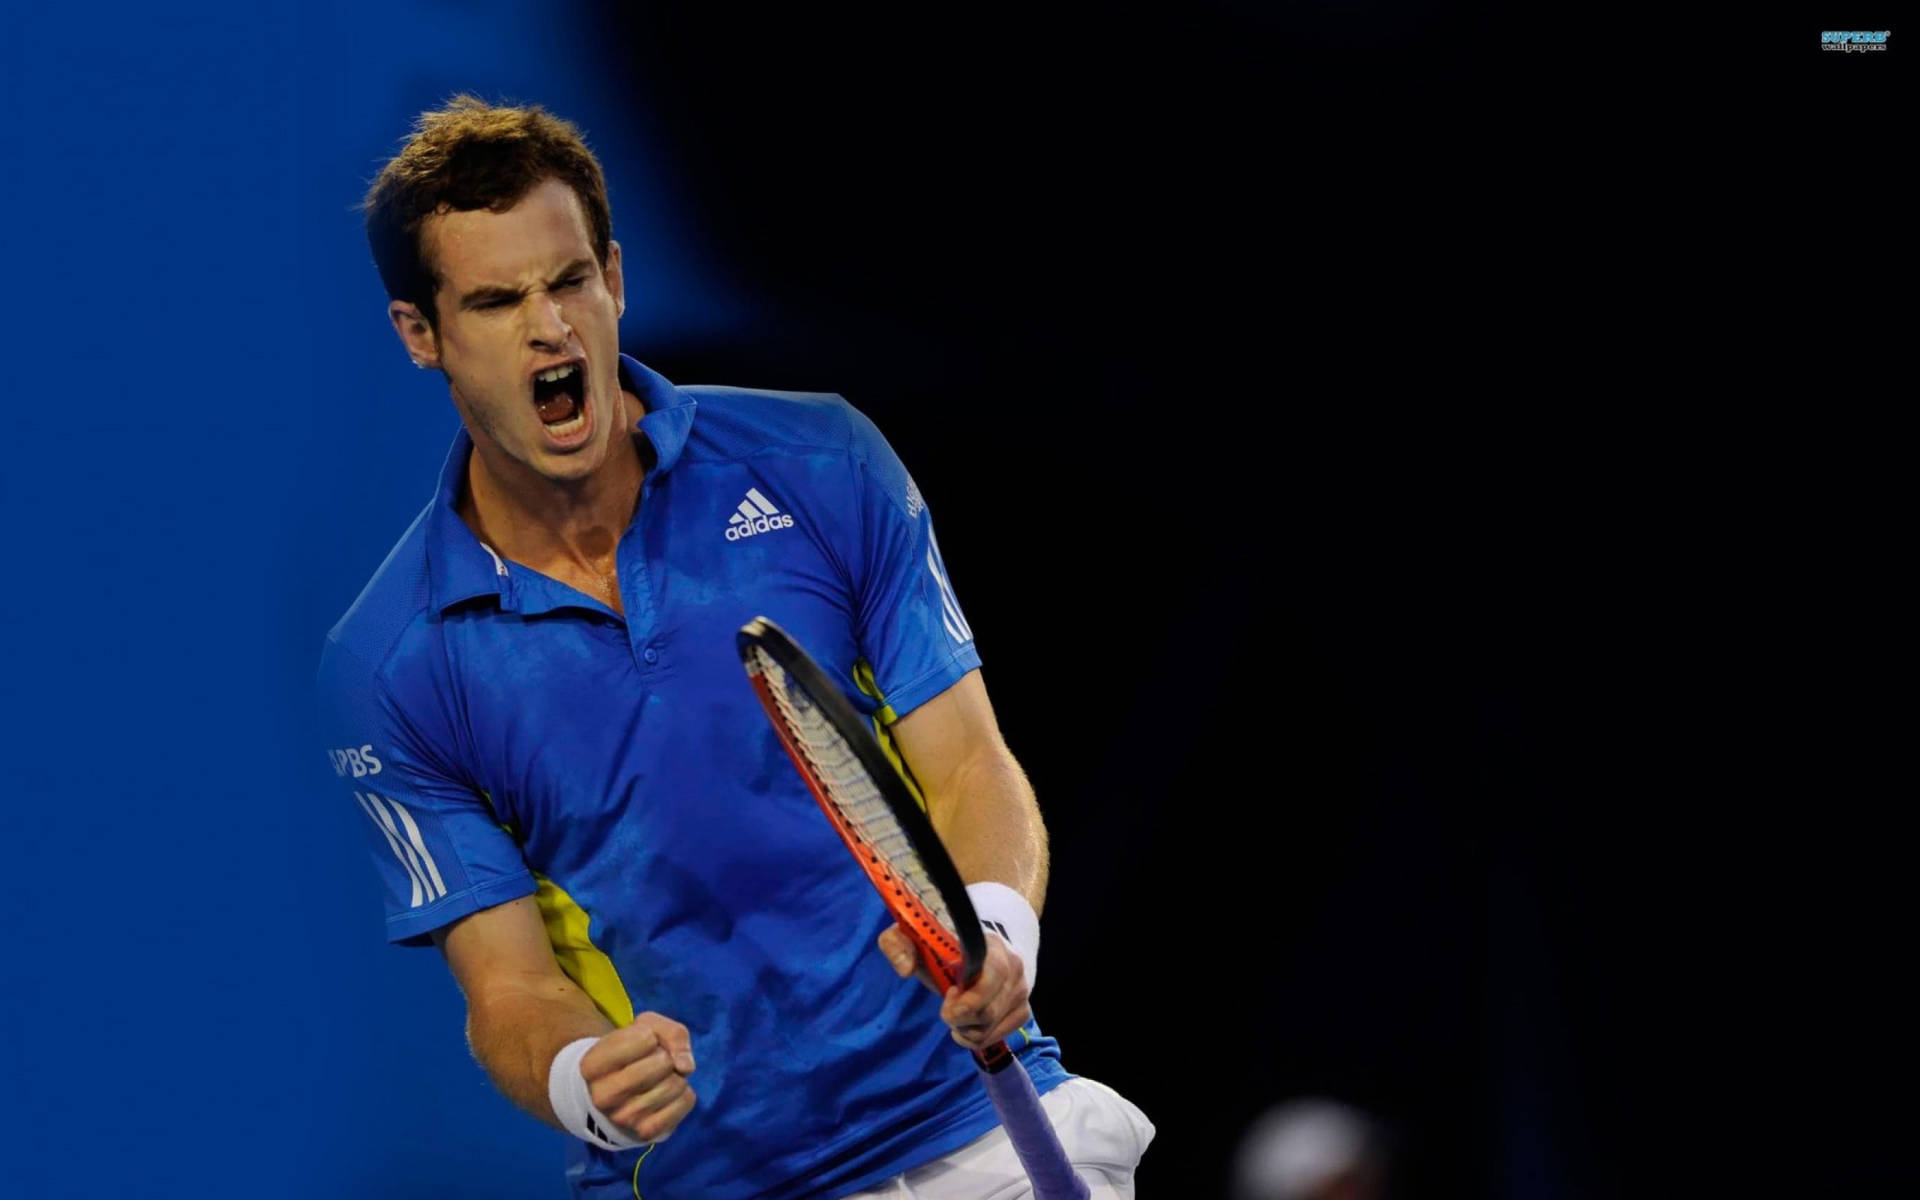 Andy Murray On The Move In A Challenging Tennis Match. Wallpaper